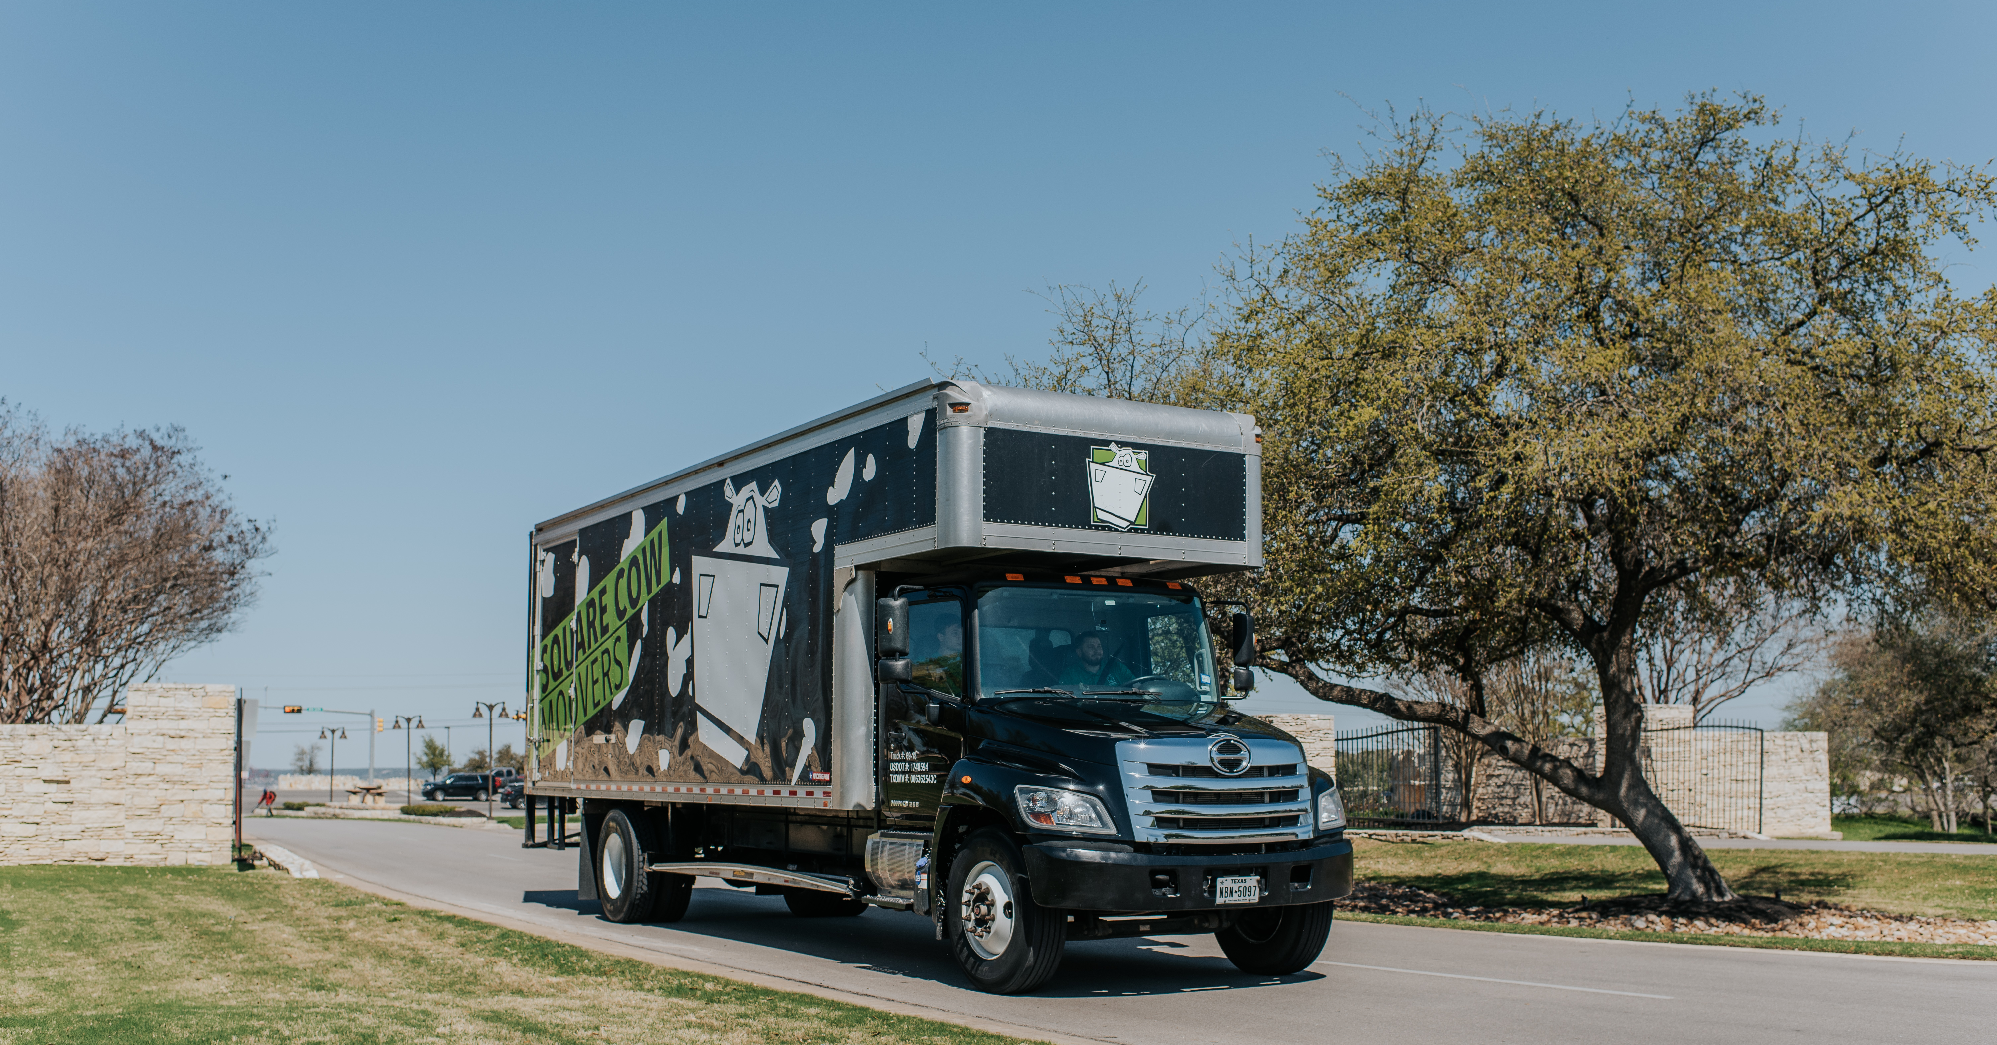 Square Cow Movers Packing and Moving in Houston